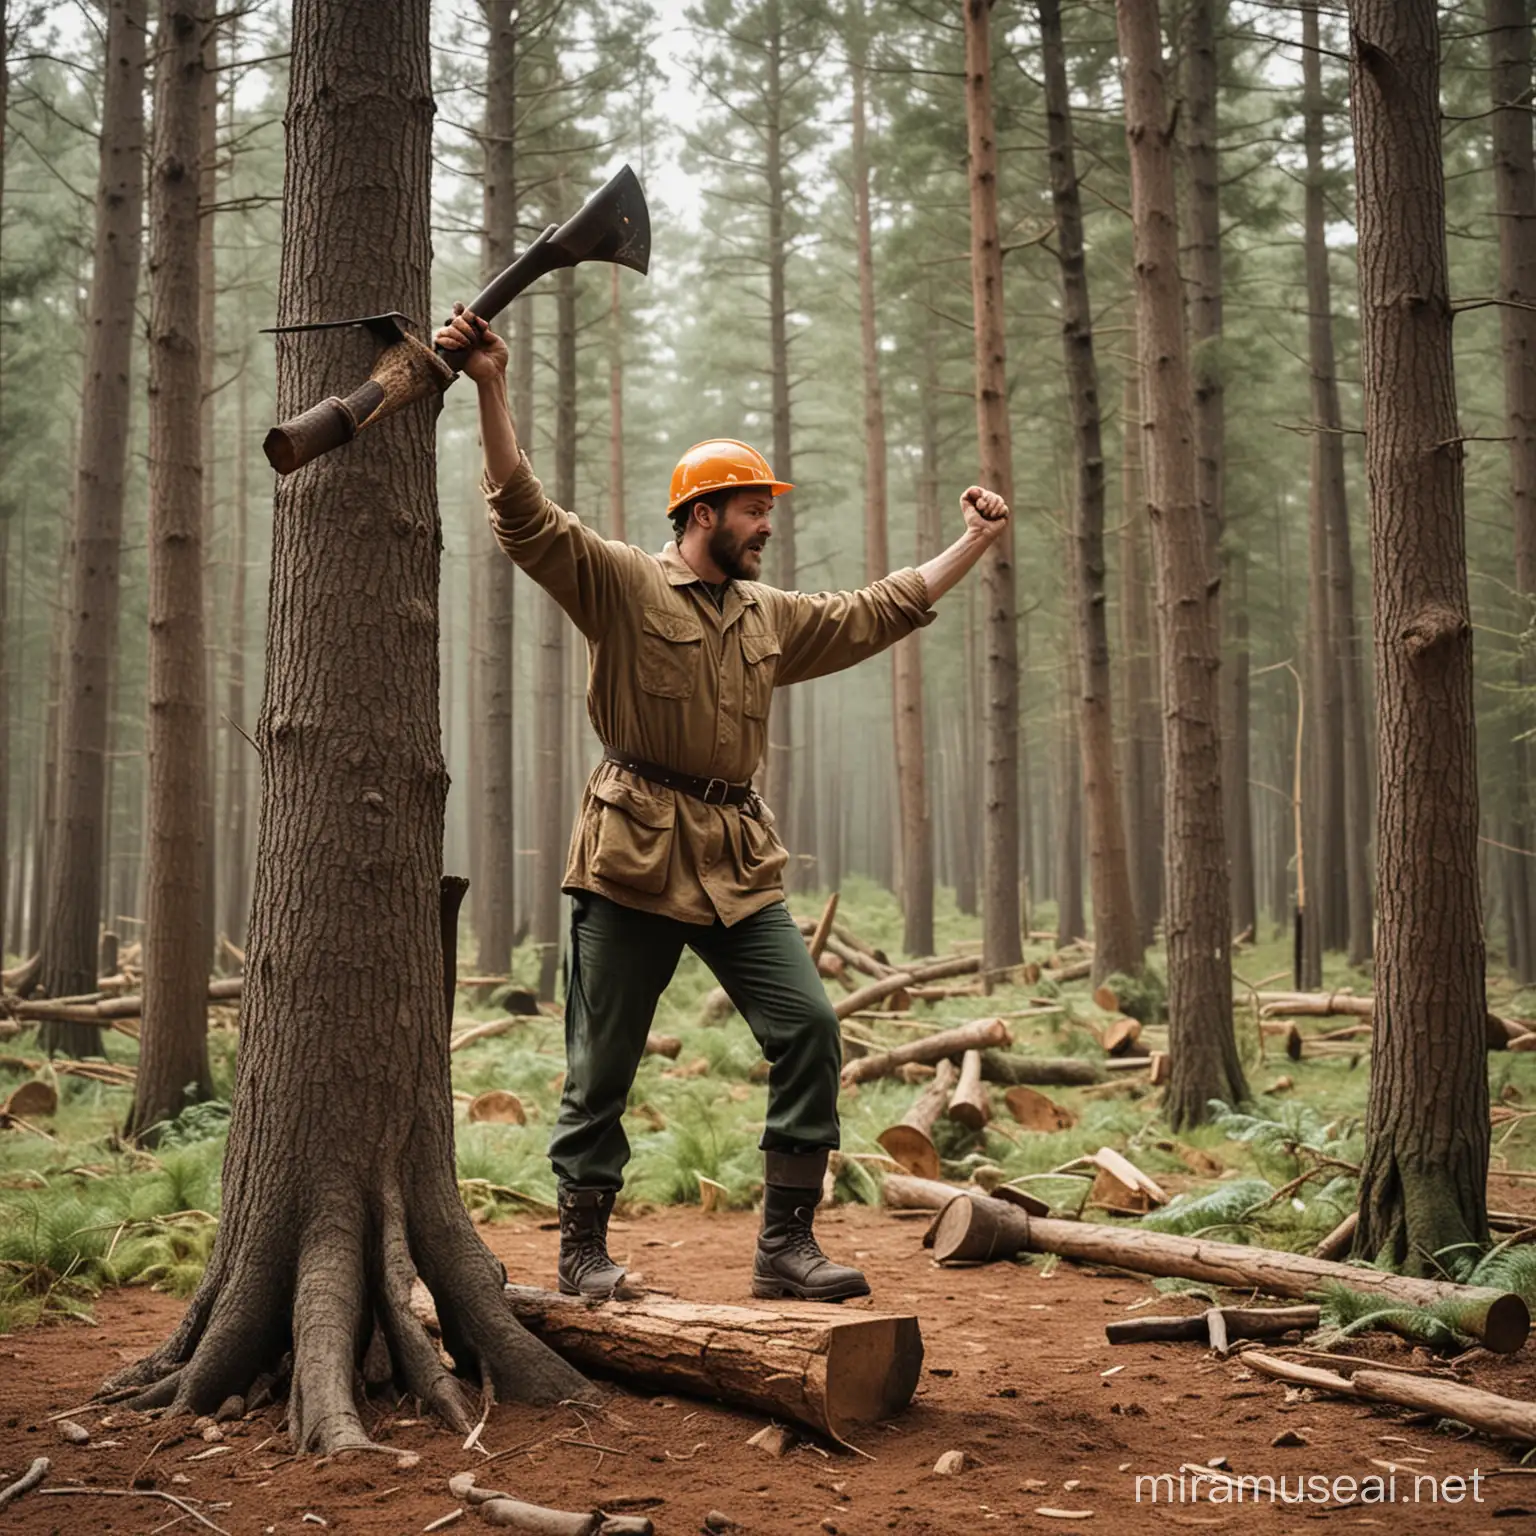 Posture: A forest worker, the back straight, one hand above shoulder level, standing on two bent legs at the knees, felling a tree using an axe above the head.